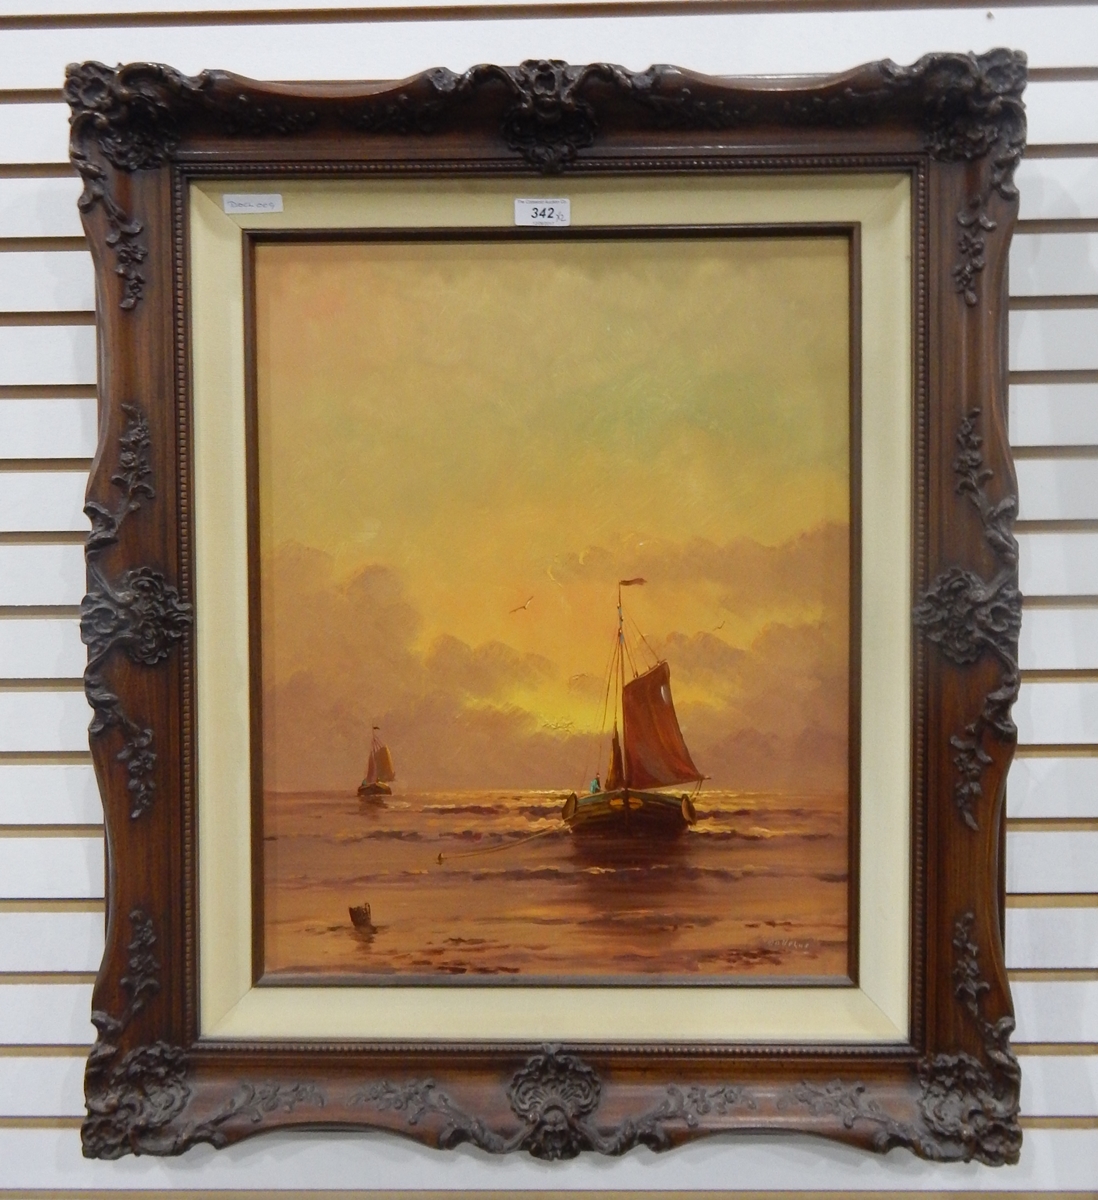 Oil on canvas Fishing boats in an evening sunset, initialled lower right 'BAKDI'(?), - Image 2 of 2